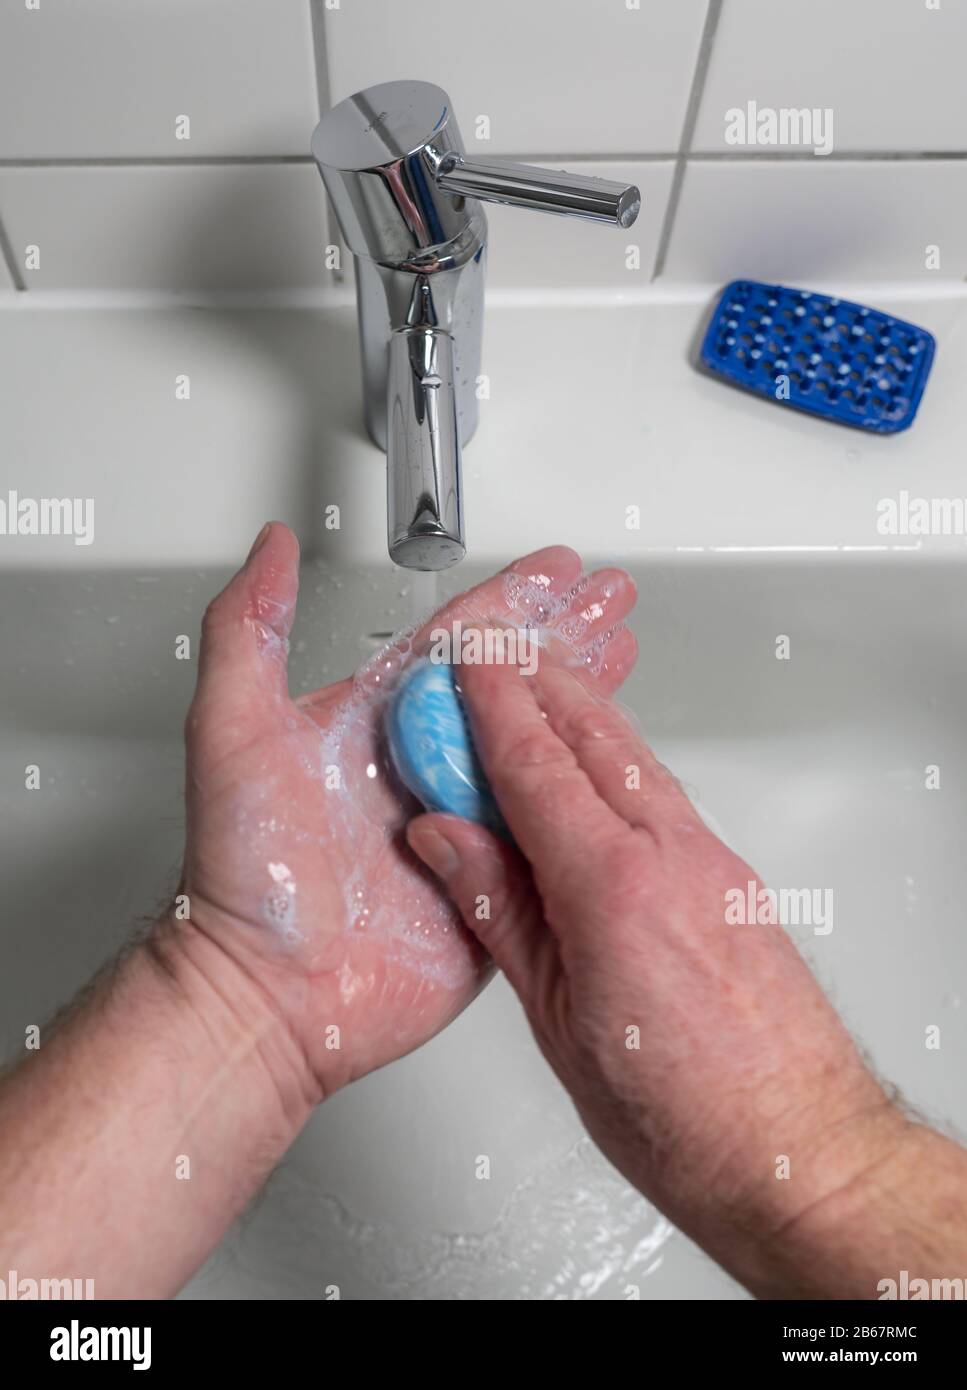 Domestic hygiene, washing hands with soap and water, Stock Photo